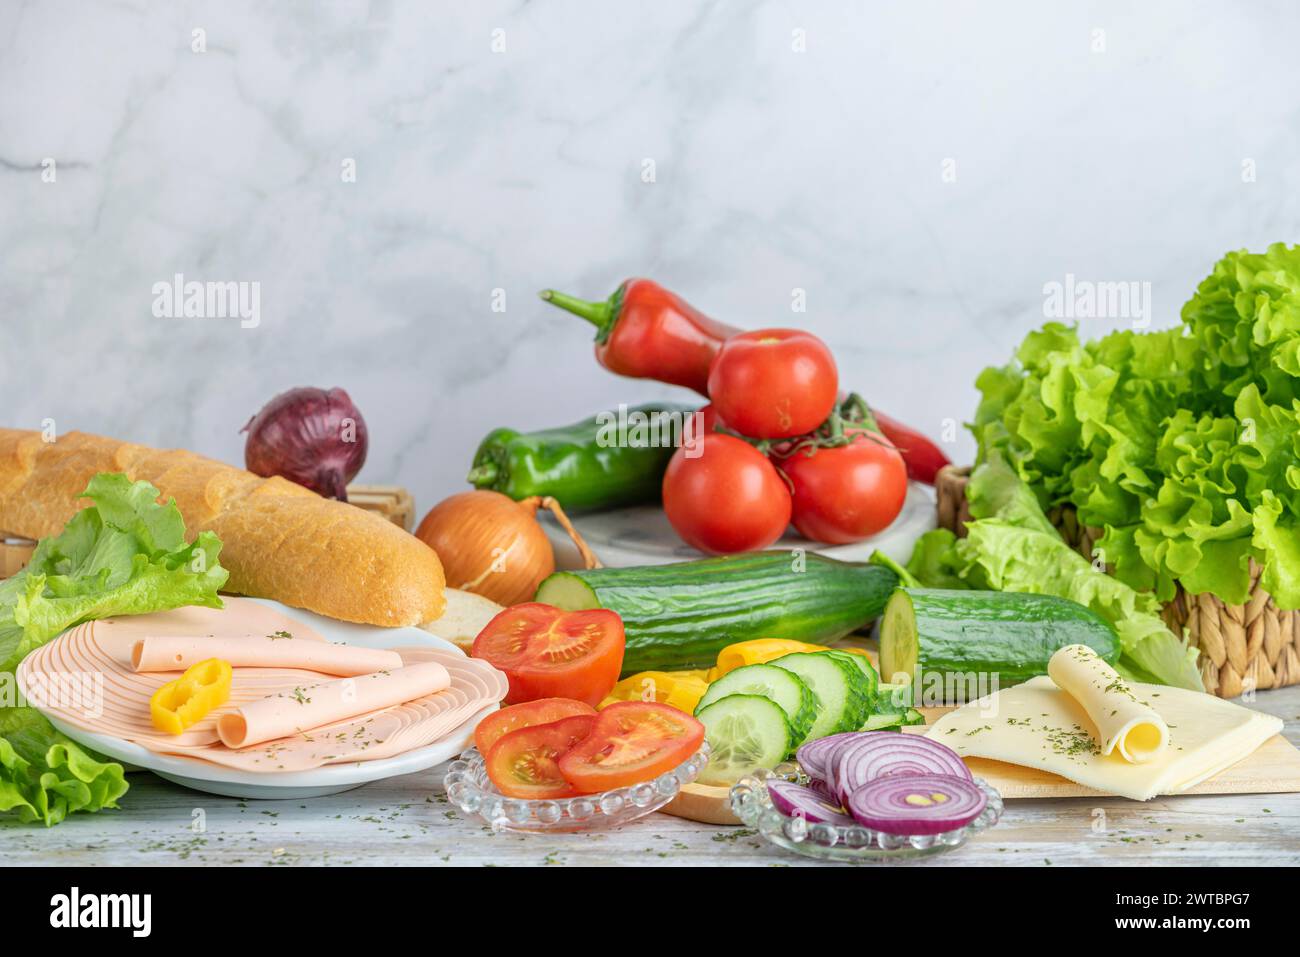 Colourful peppers, tomatoes and cucumber, some sliced, salad, cheese slices and sausage next to a baguette on a table, copy room Stock Photo